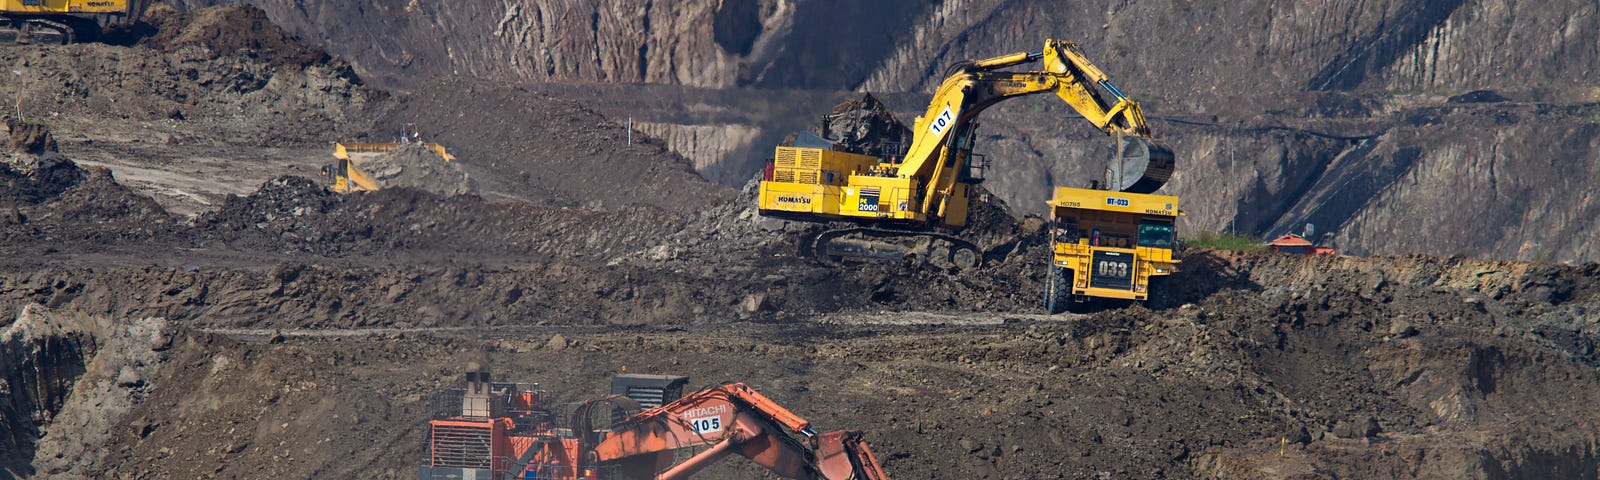 Earth movers and excavators mine for coal in an open-air strip mine.